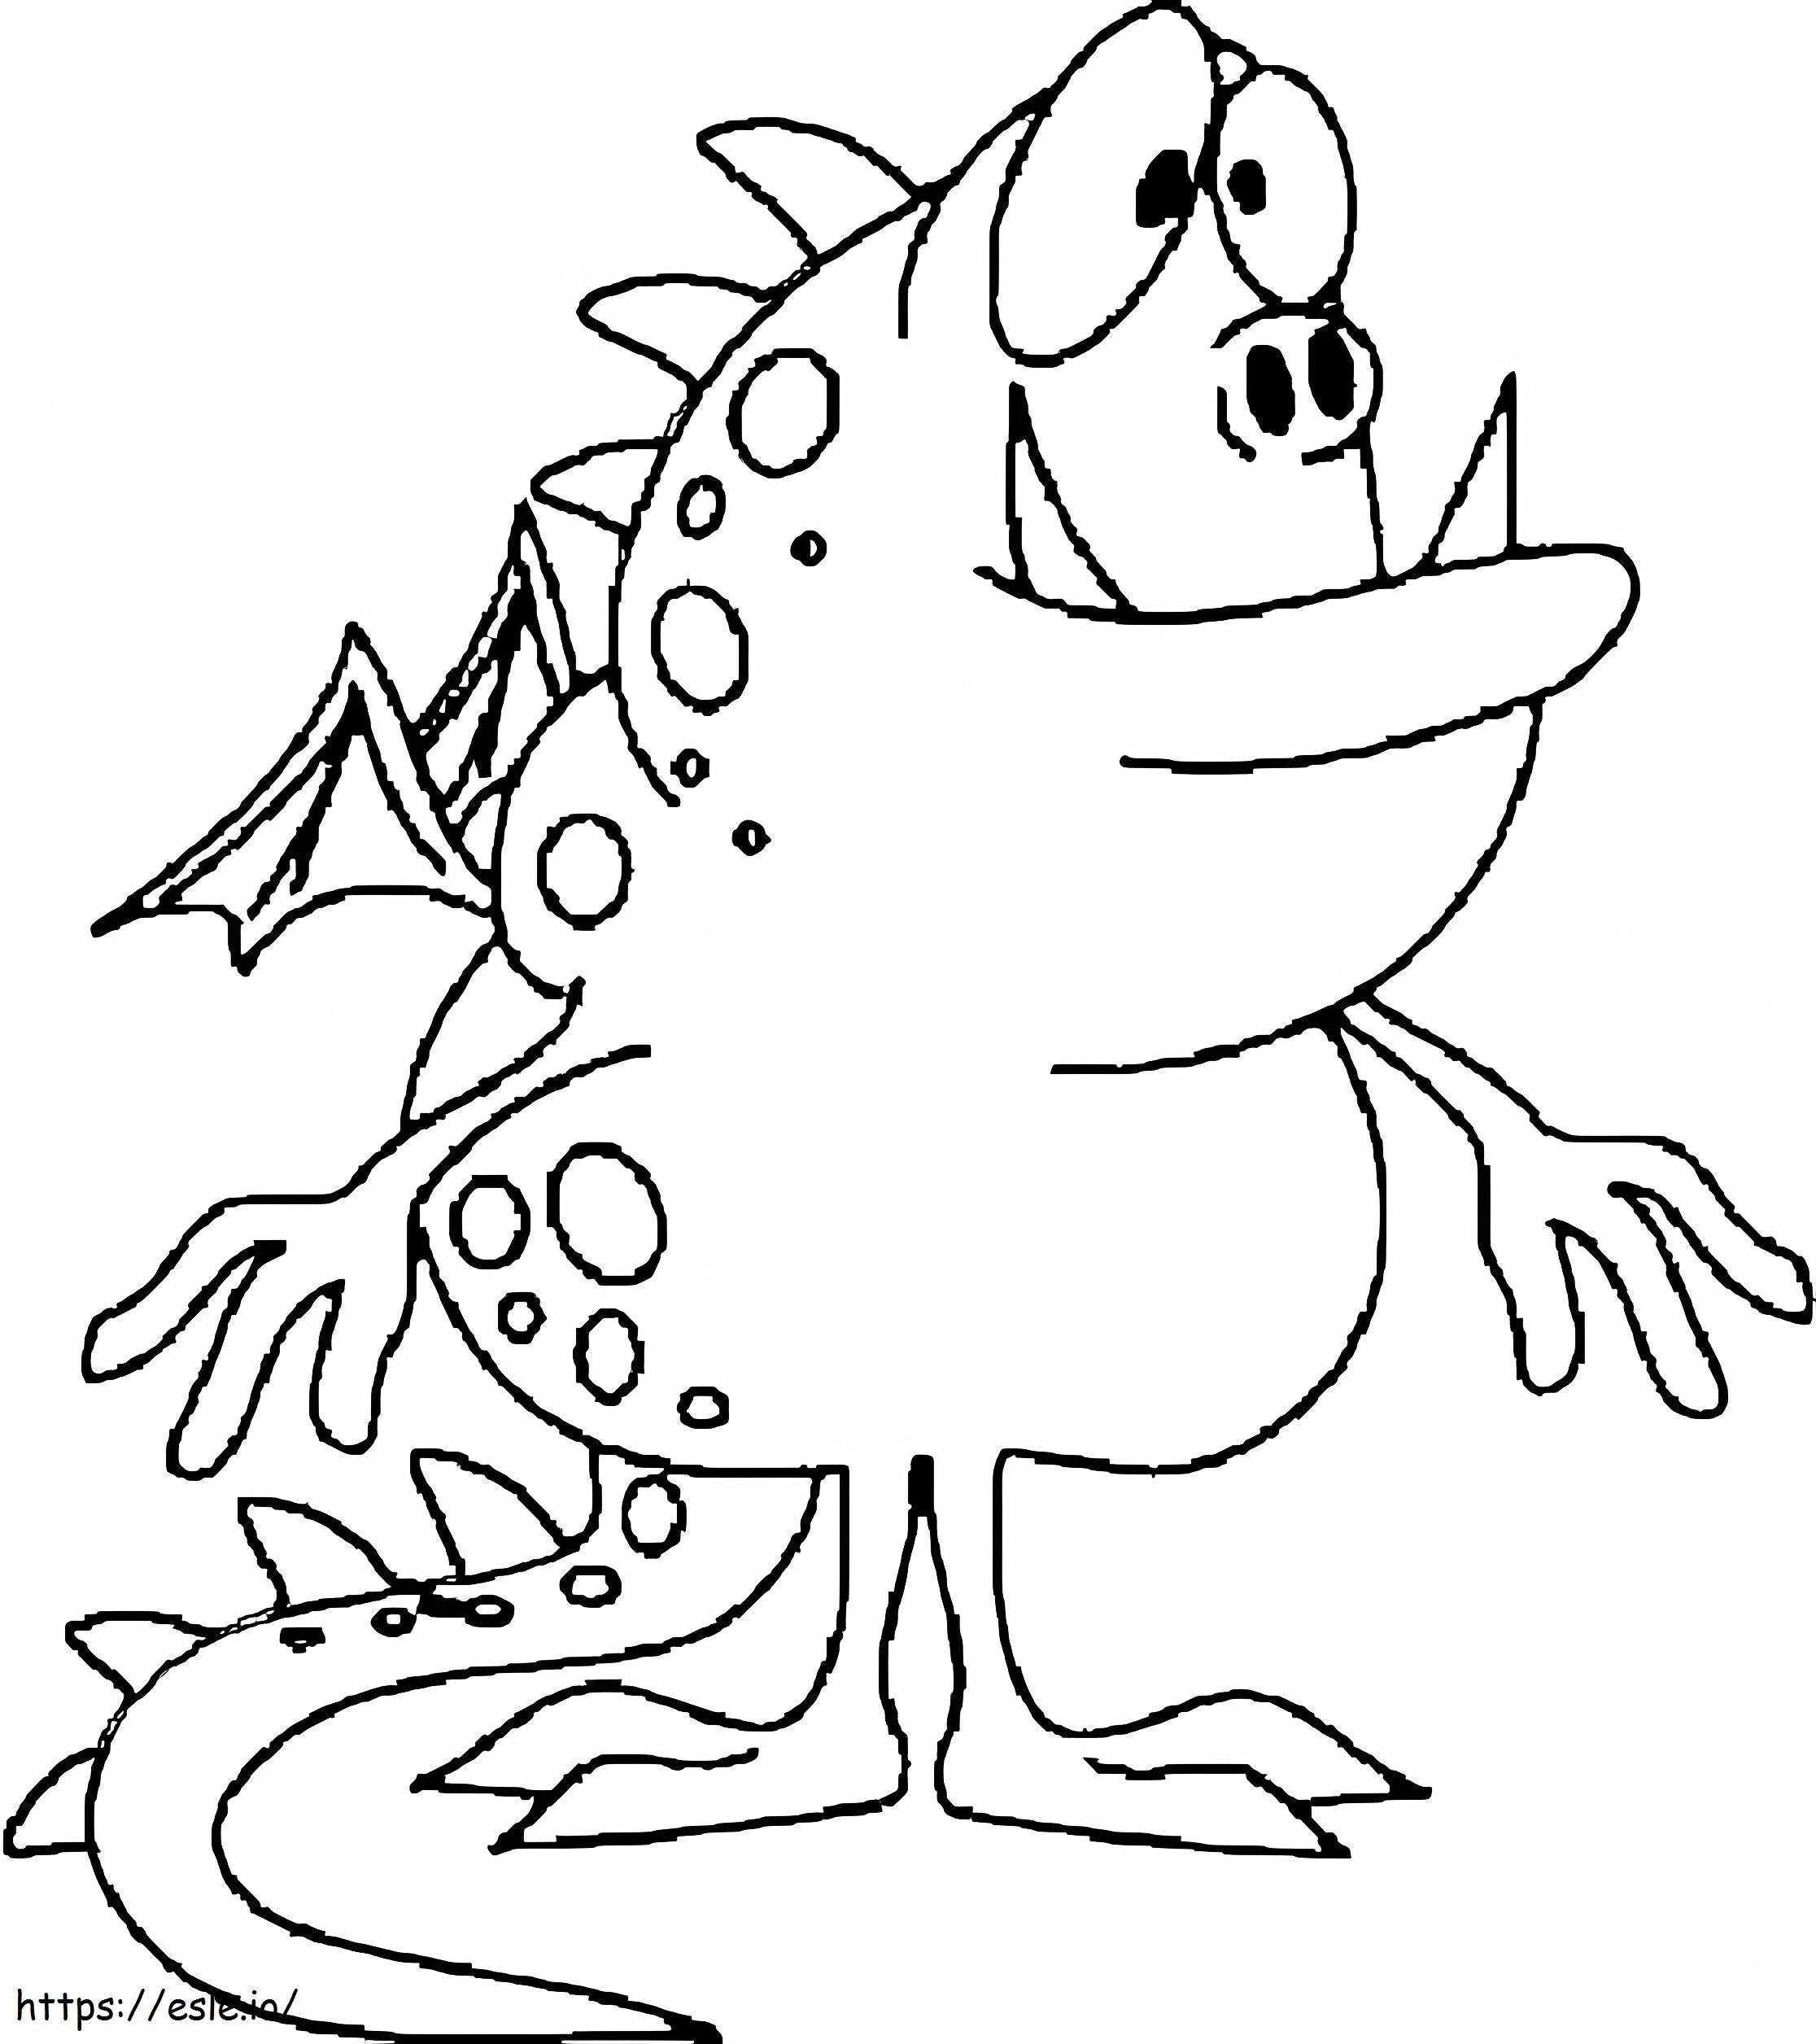 Perfect Monster coloring page